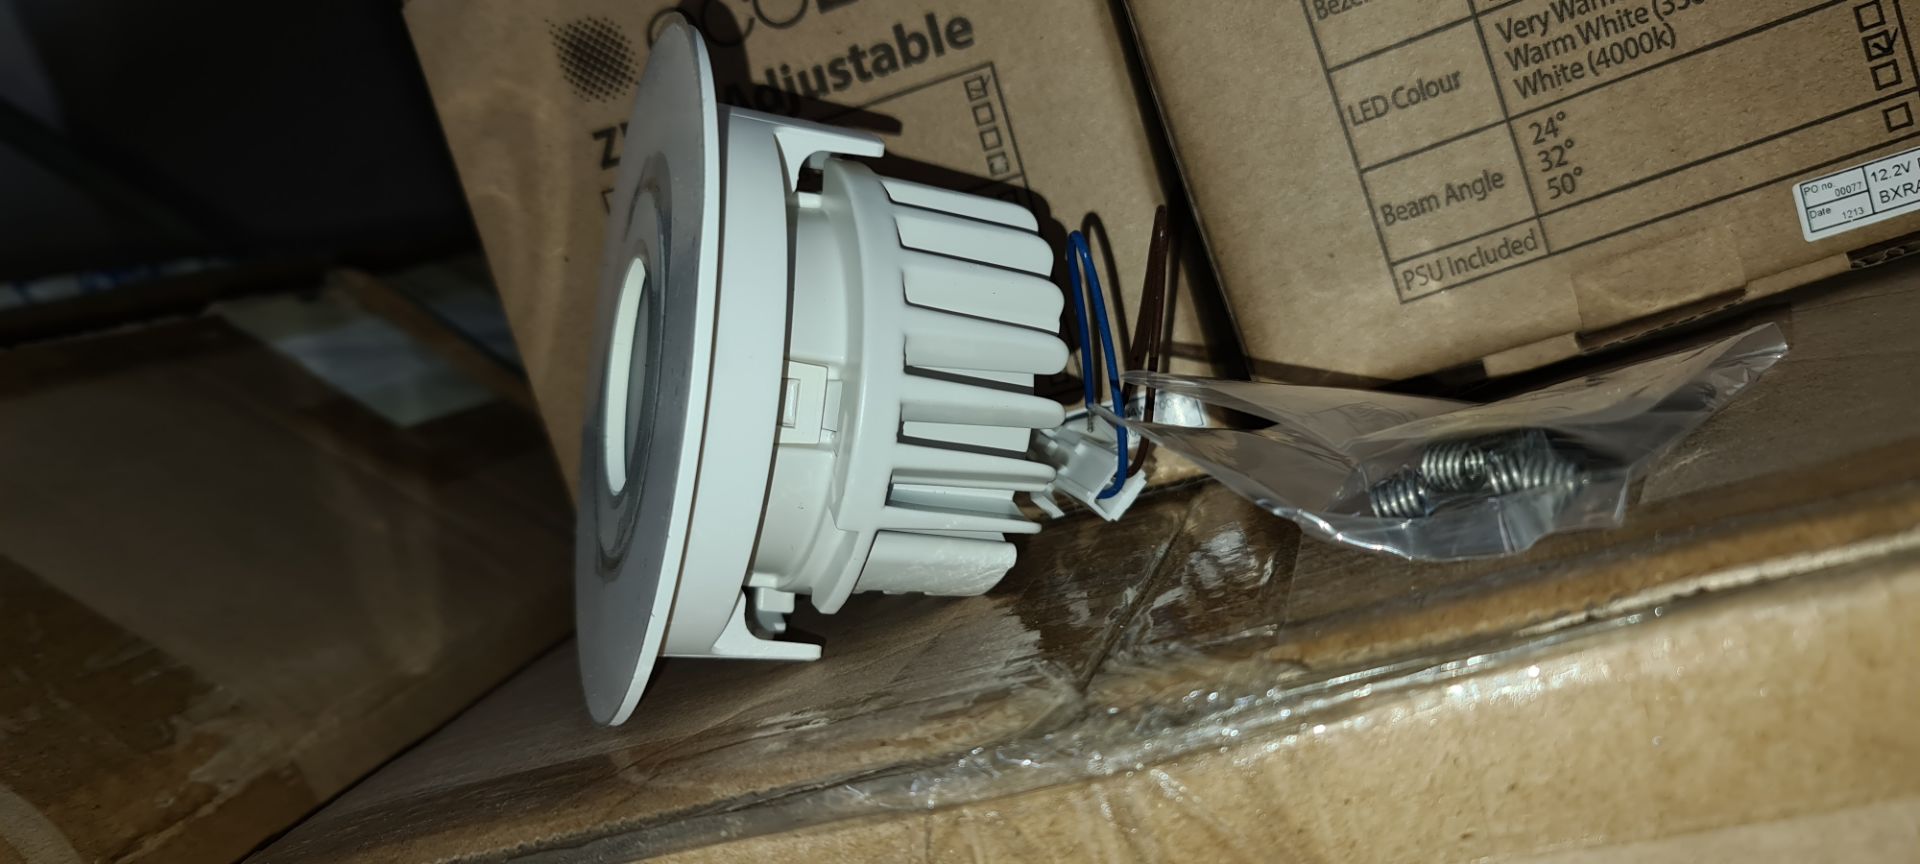 26 off EcoLED ZEP2 fixed white downlights, 4000K, model Z2-F-W-10-40-80-45-D4 - 2 boxes & 6 individu - Image 3 of 10